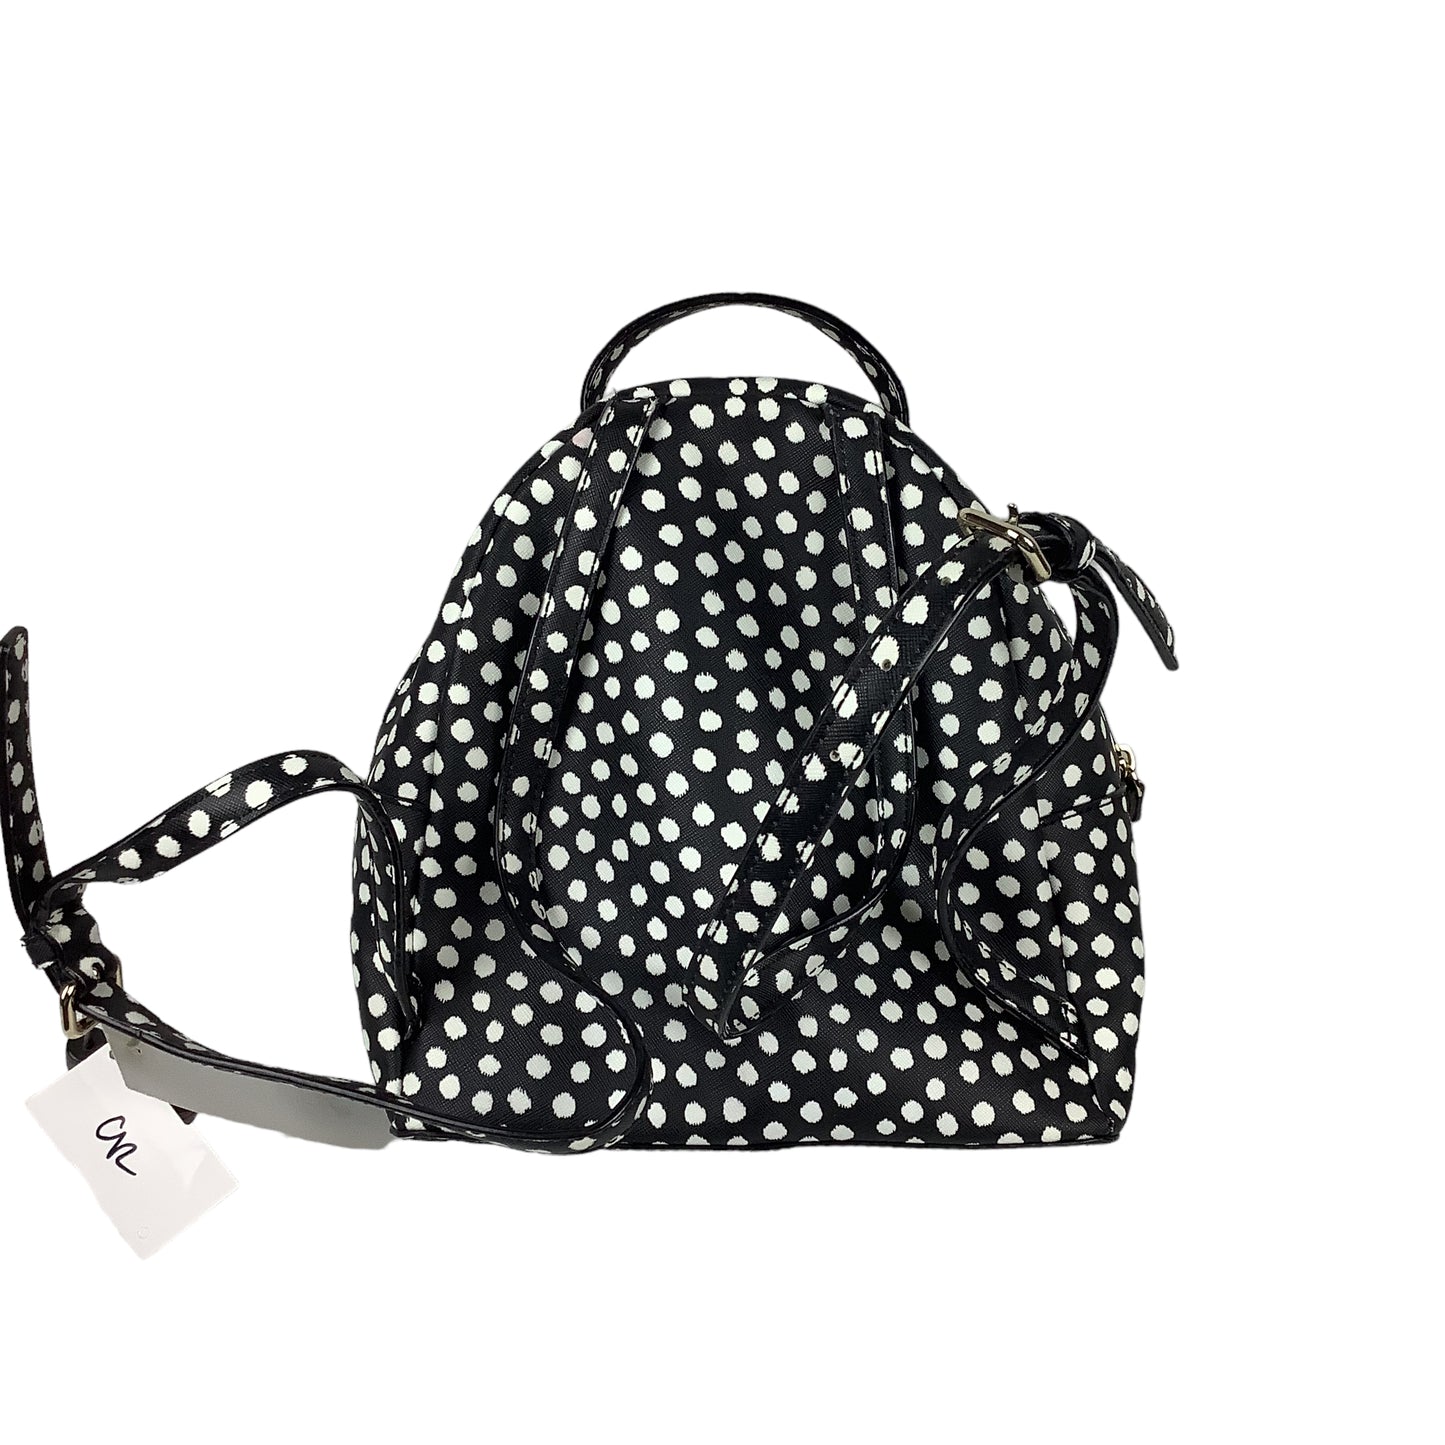 Backpack Designer By Kate Spade  Size: Small